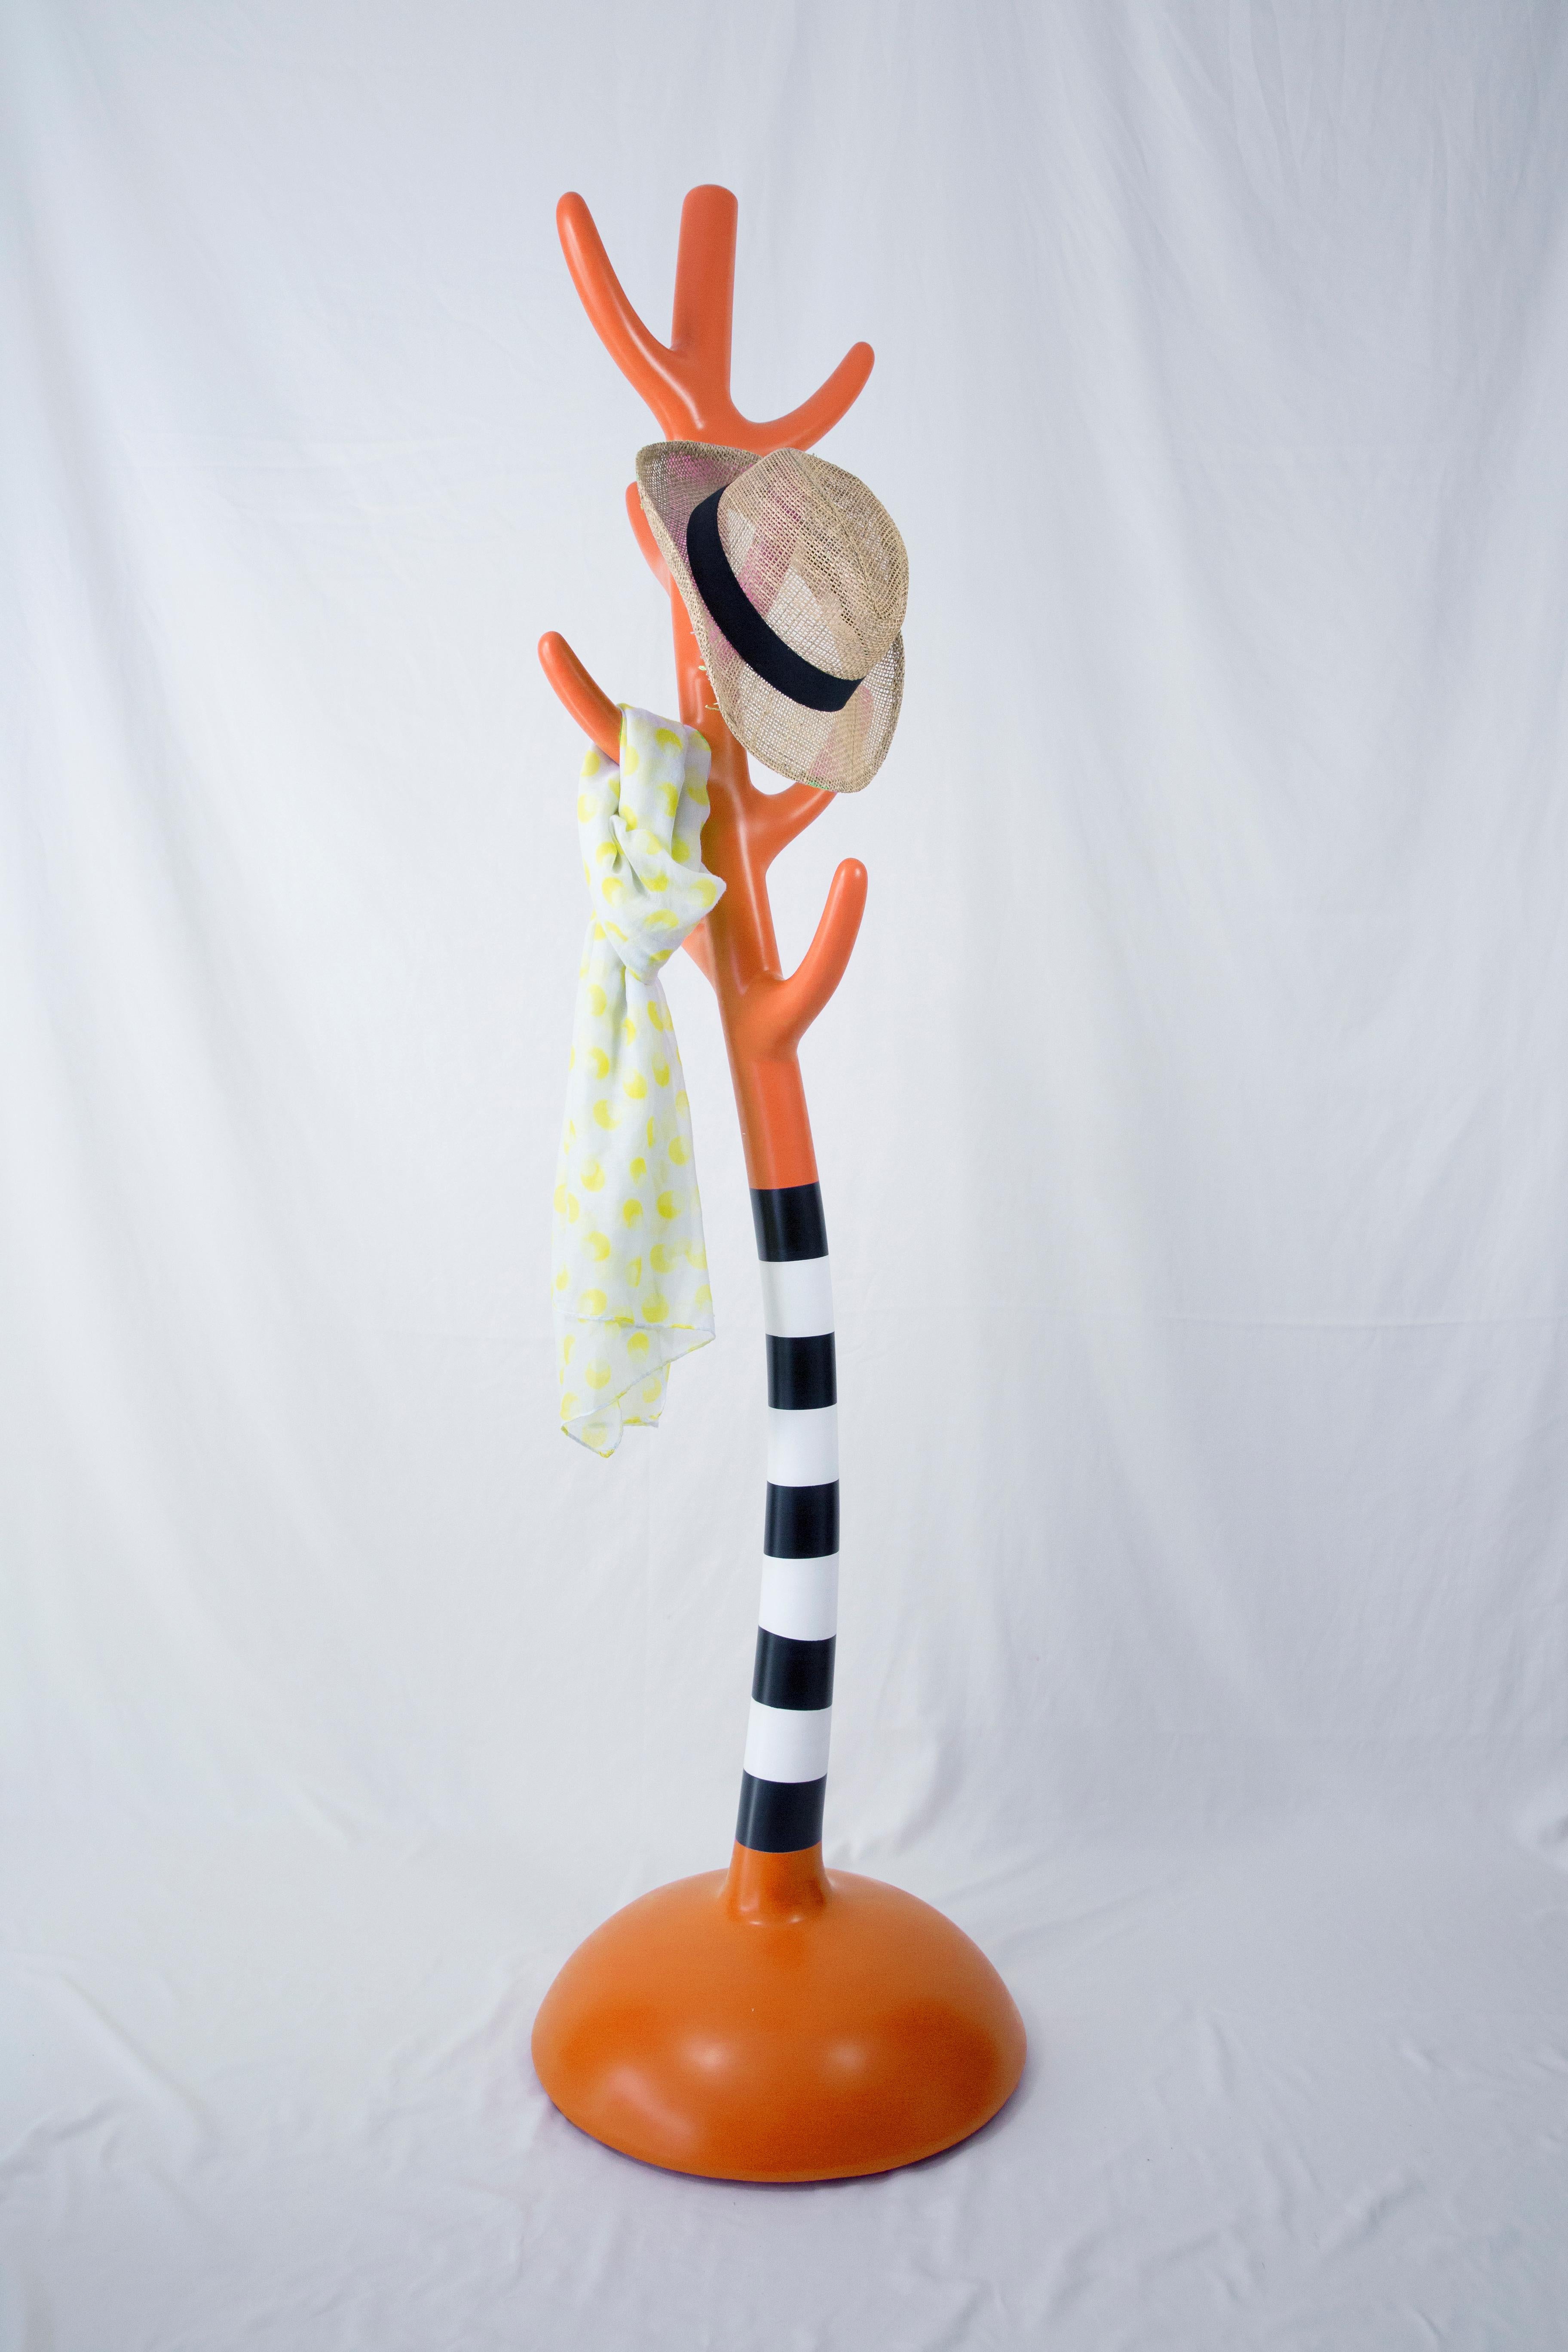 Crooked Orange Colourful Coat Rack, Amorphous Sculpture, Artistic In New Condition For Sale In Istanbul, Maltepe